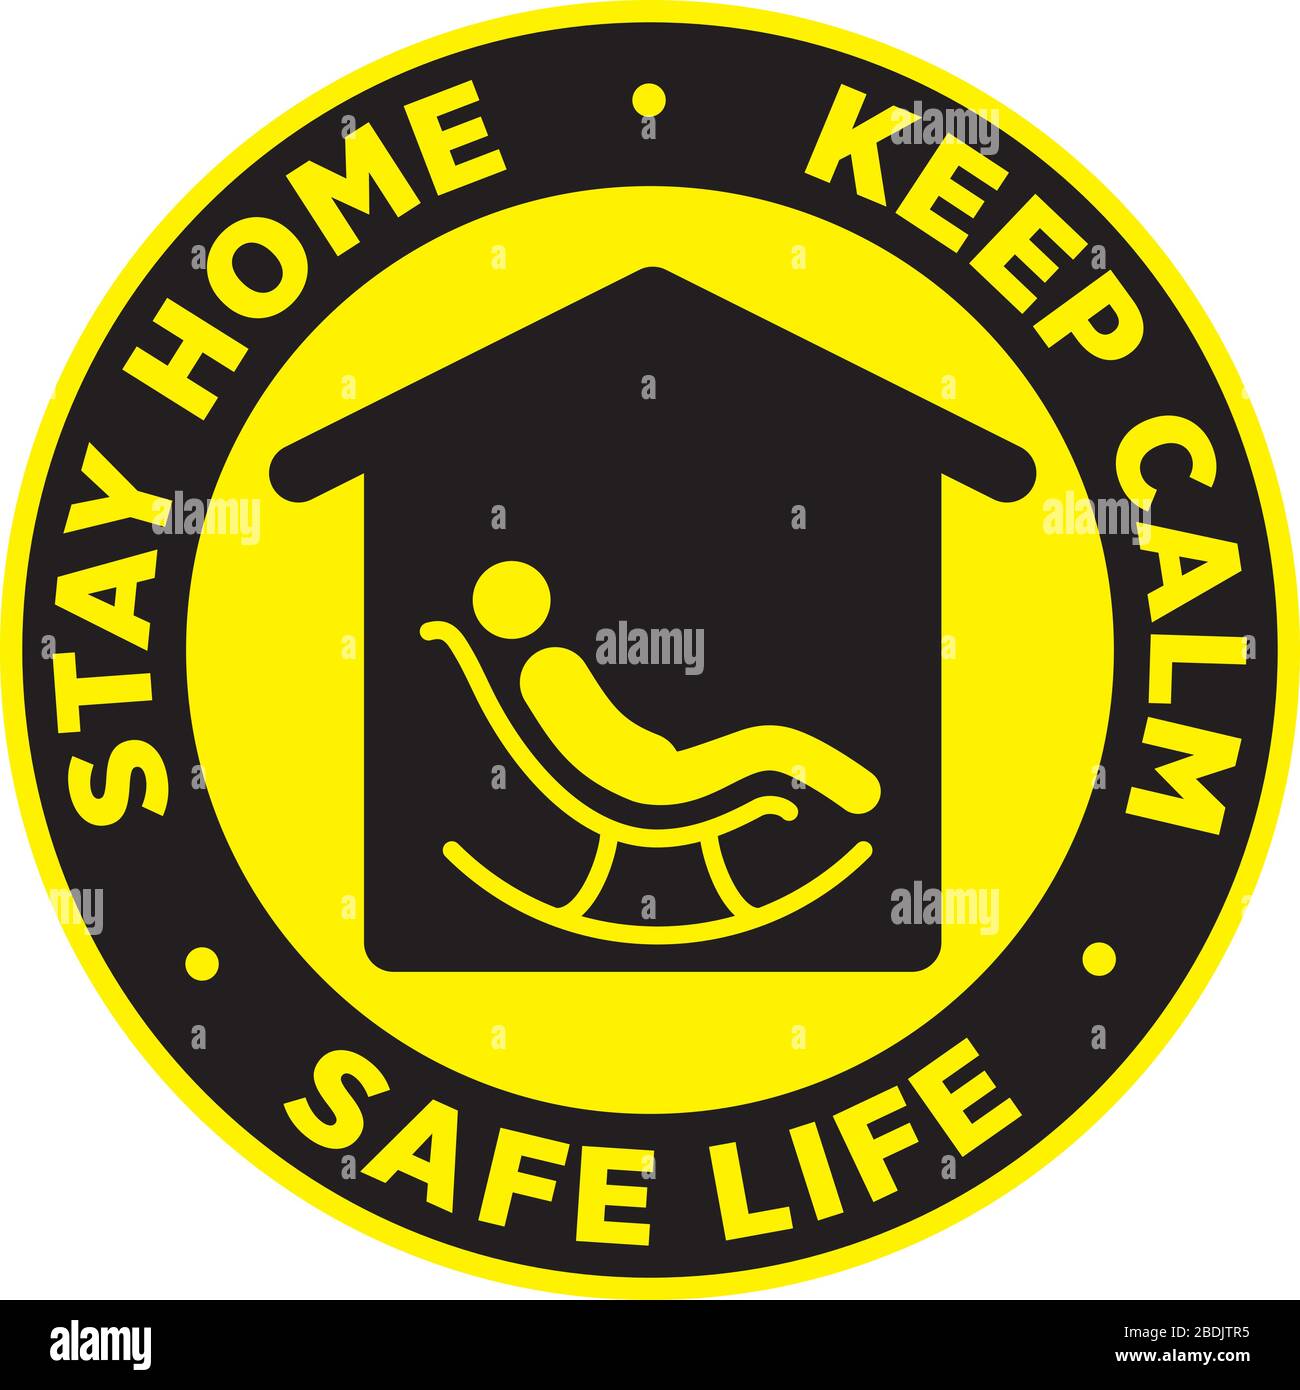 Stay Home, Keep Calm and Safe Life Signage or Sticker for help reduce the risk of catching coronavirus Covid-19. Vector sign. Stock Vector